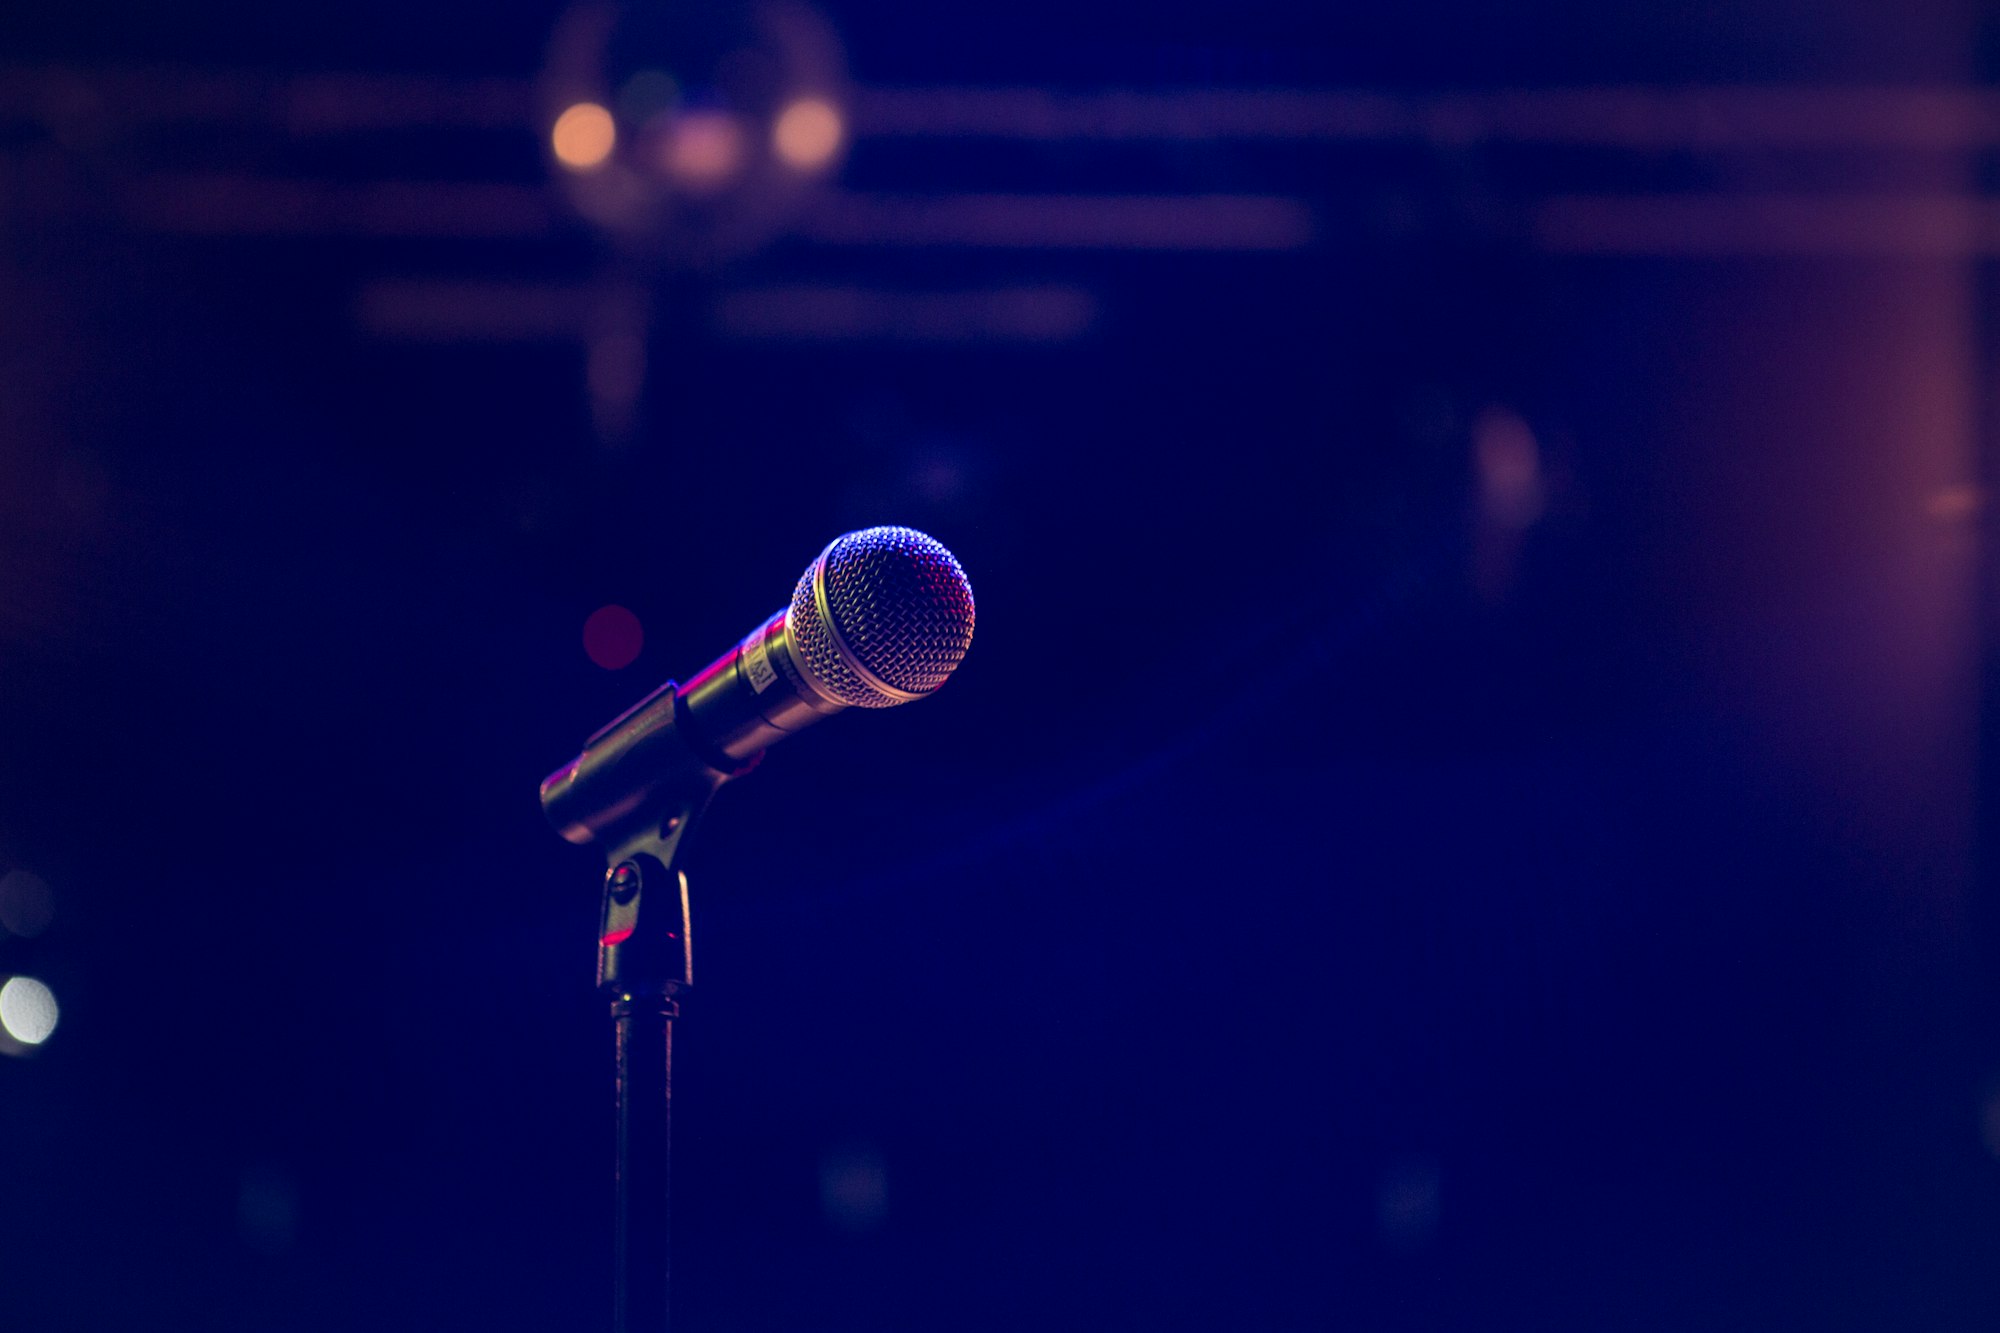 Simple microphone shot on the stage